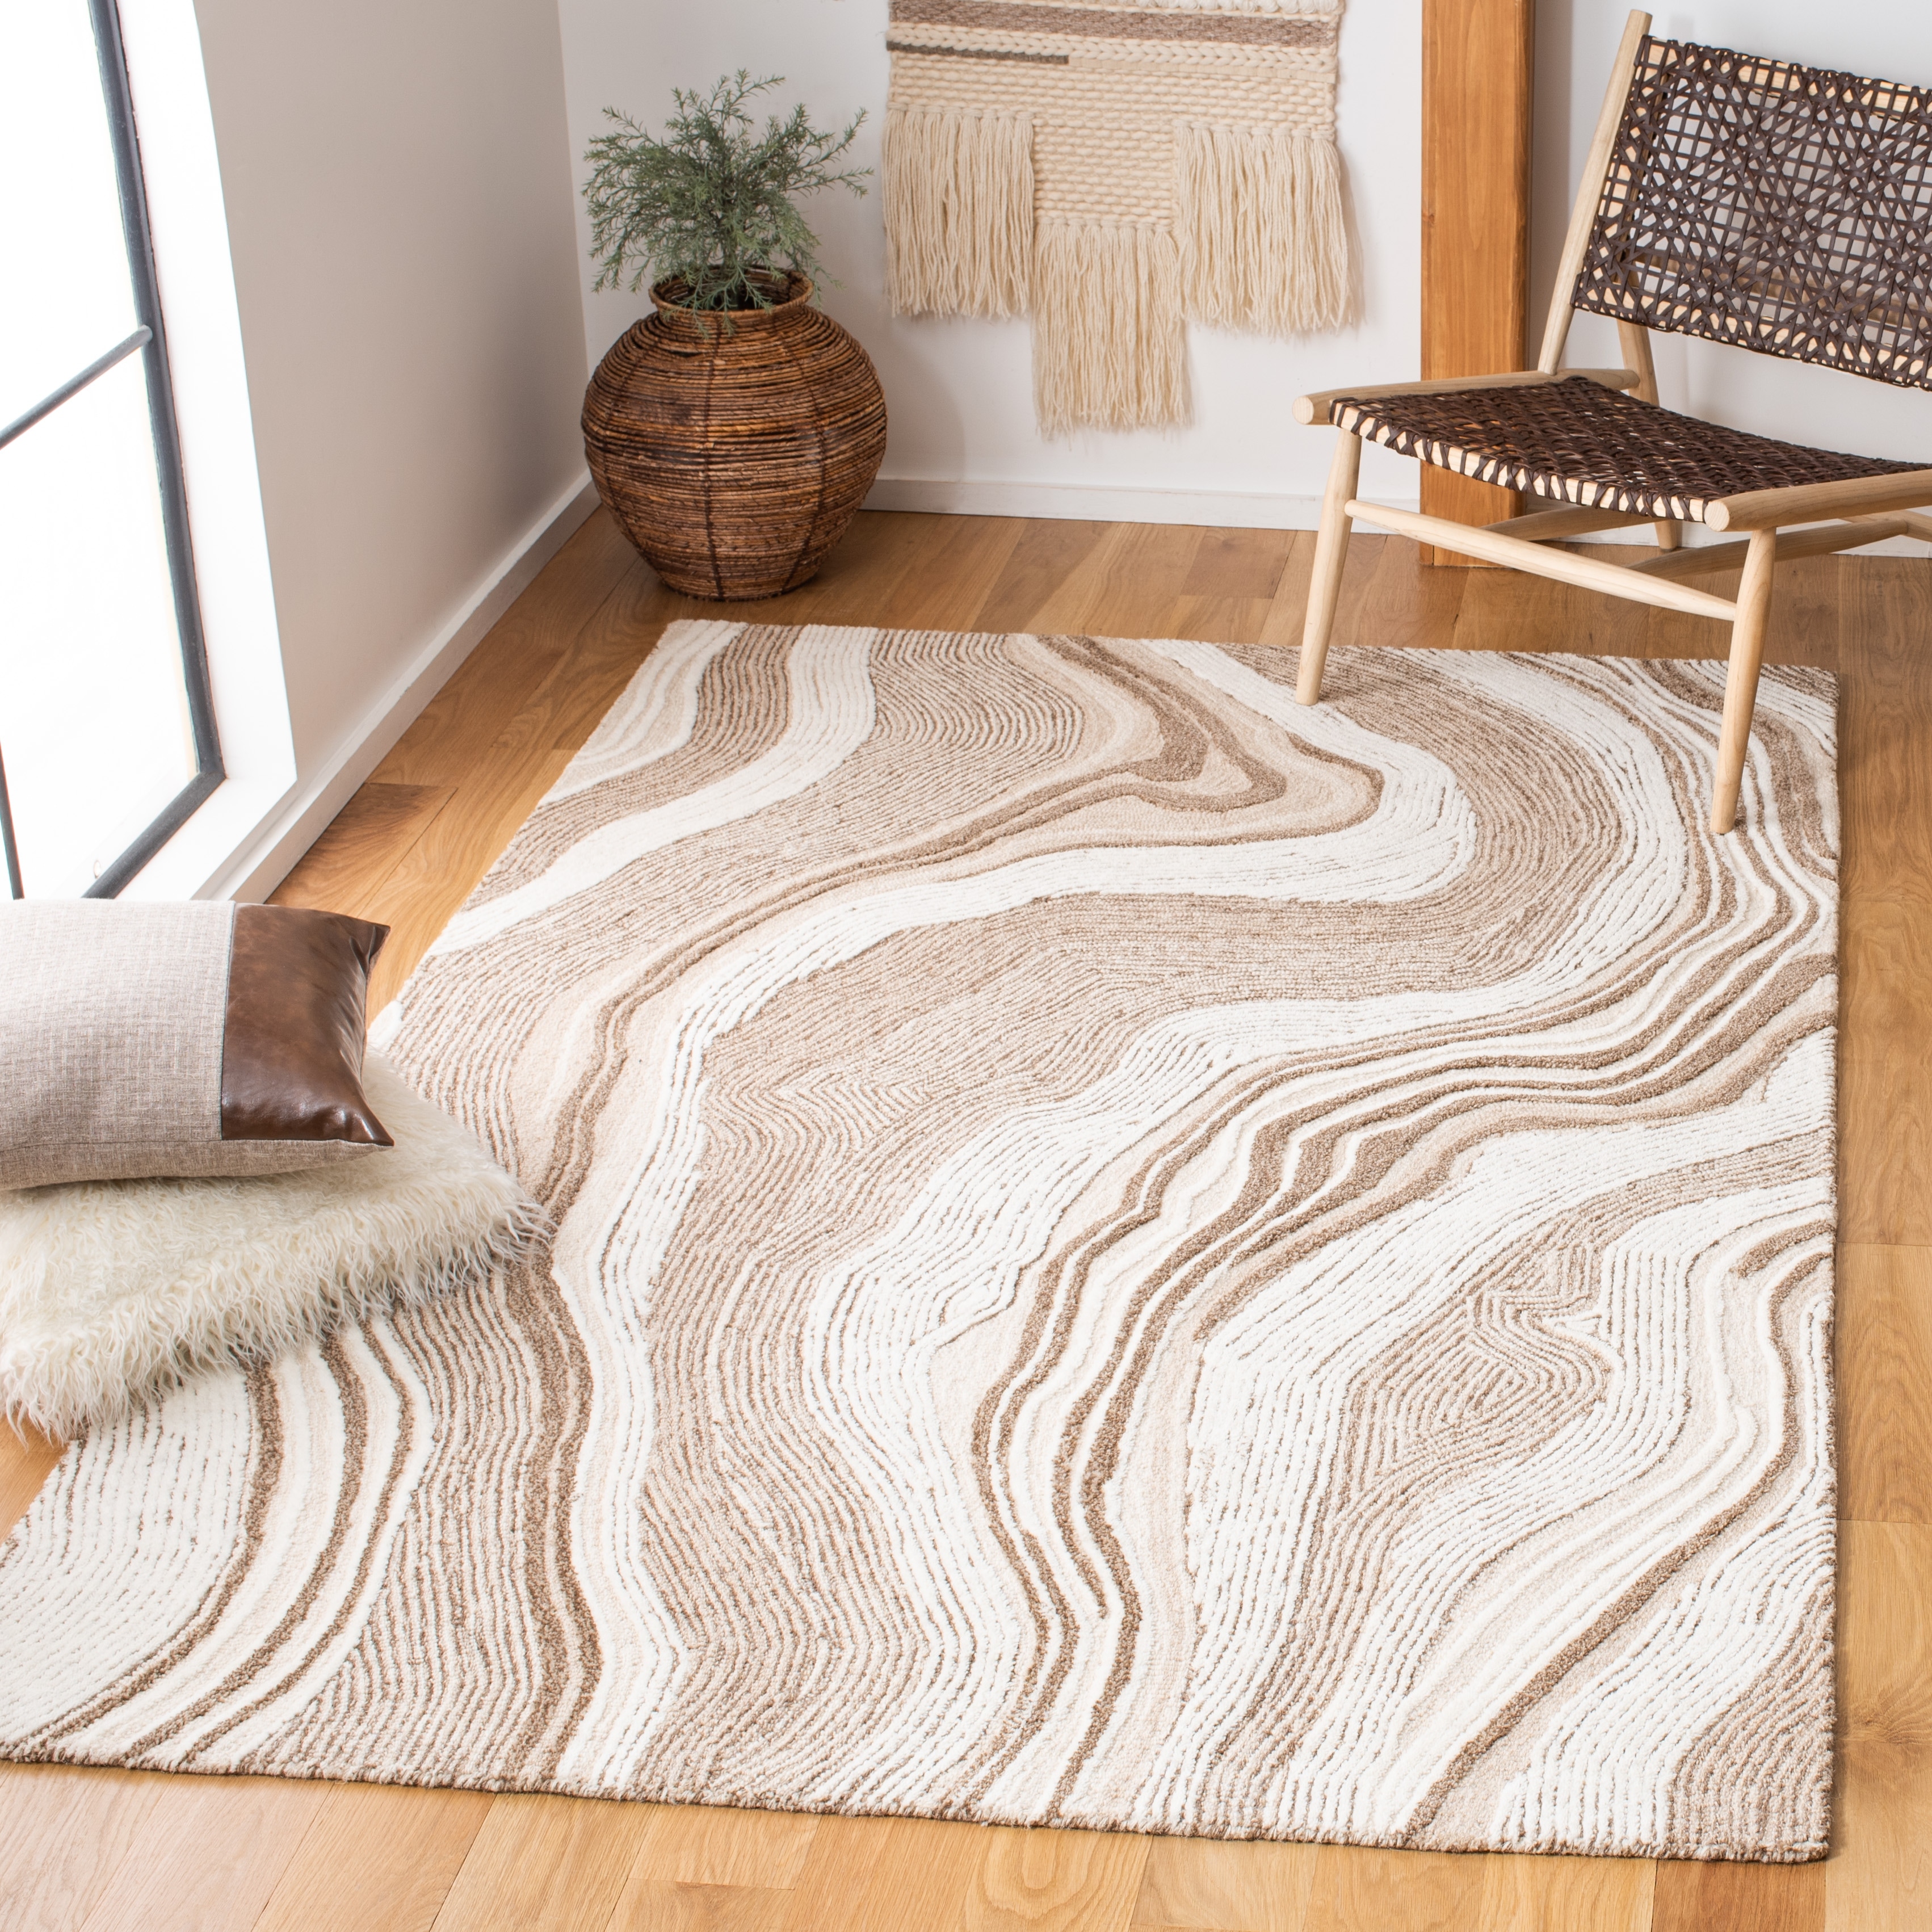 Does This Stylish Safavieh Rug Transform Your Space. Discover Why Thousands Love The Madison Collection